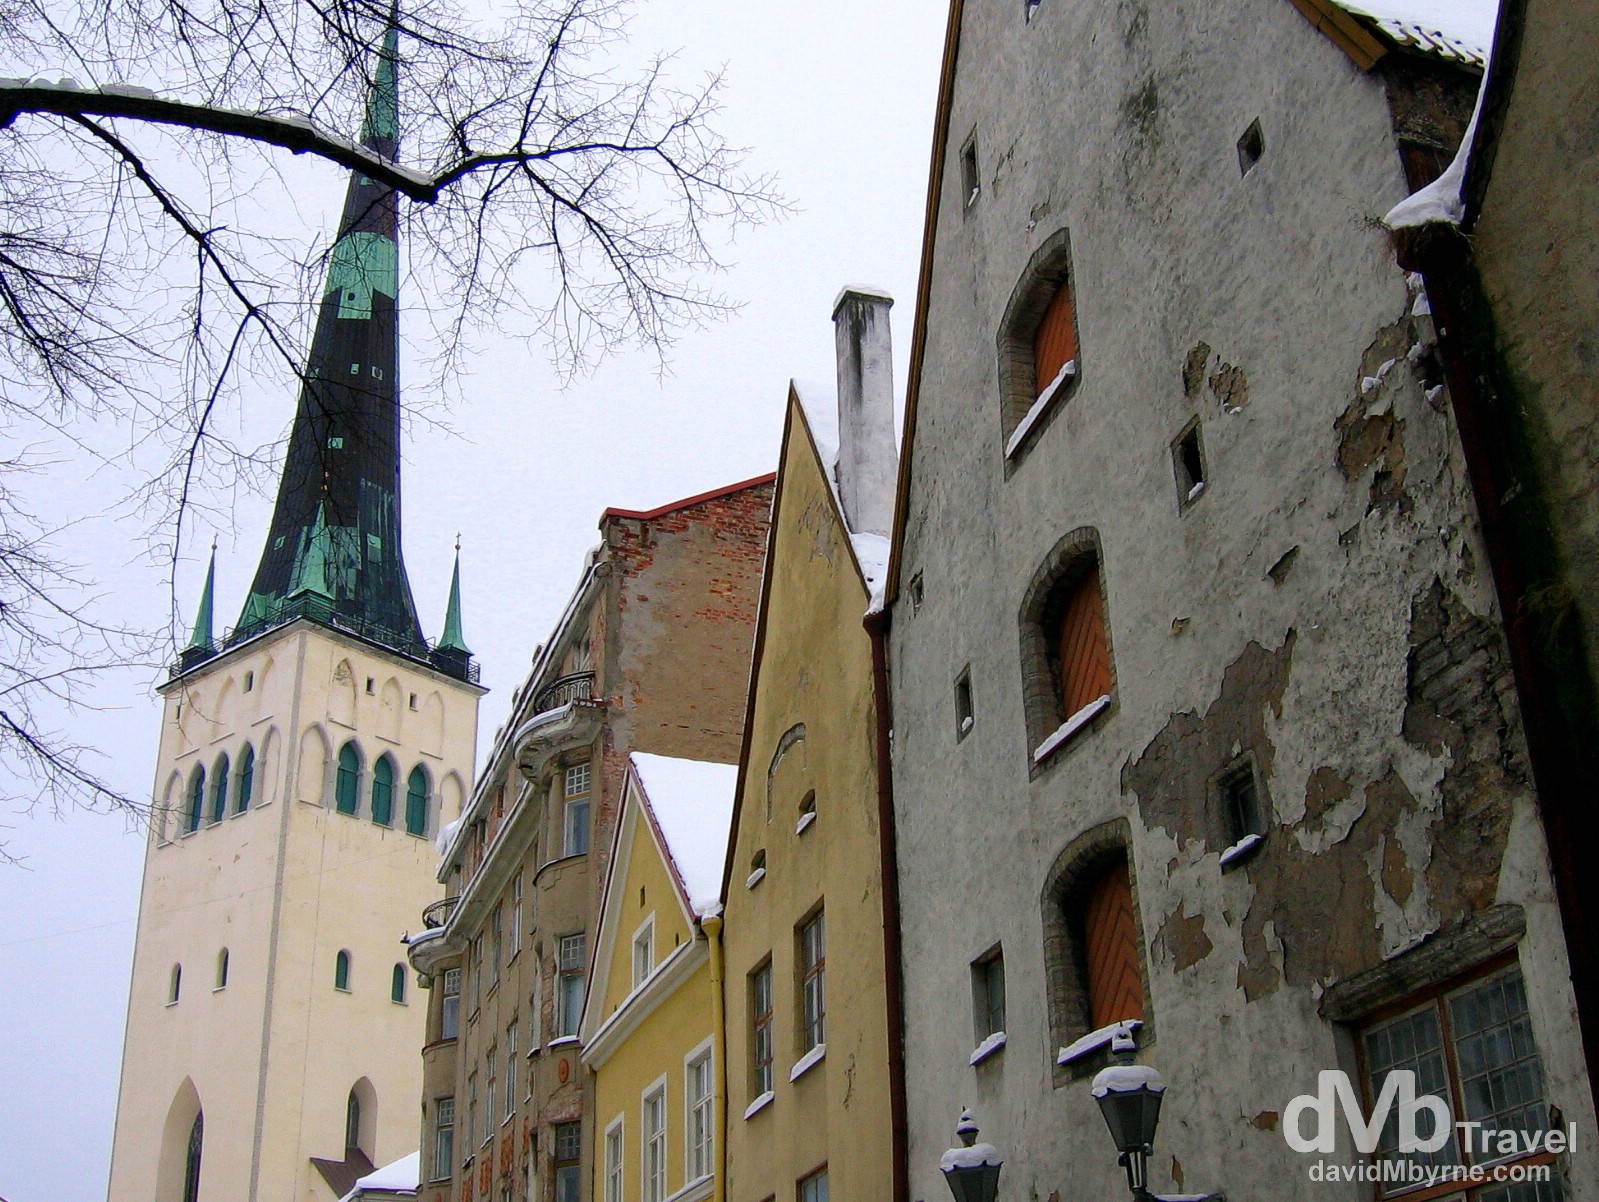 Buildings facades & the spire of the Oleviste Church in the Old Town of Tallinn, Estonia. March 2, 2006.